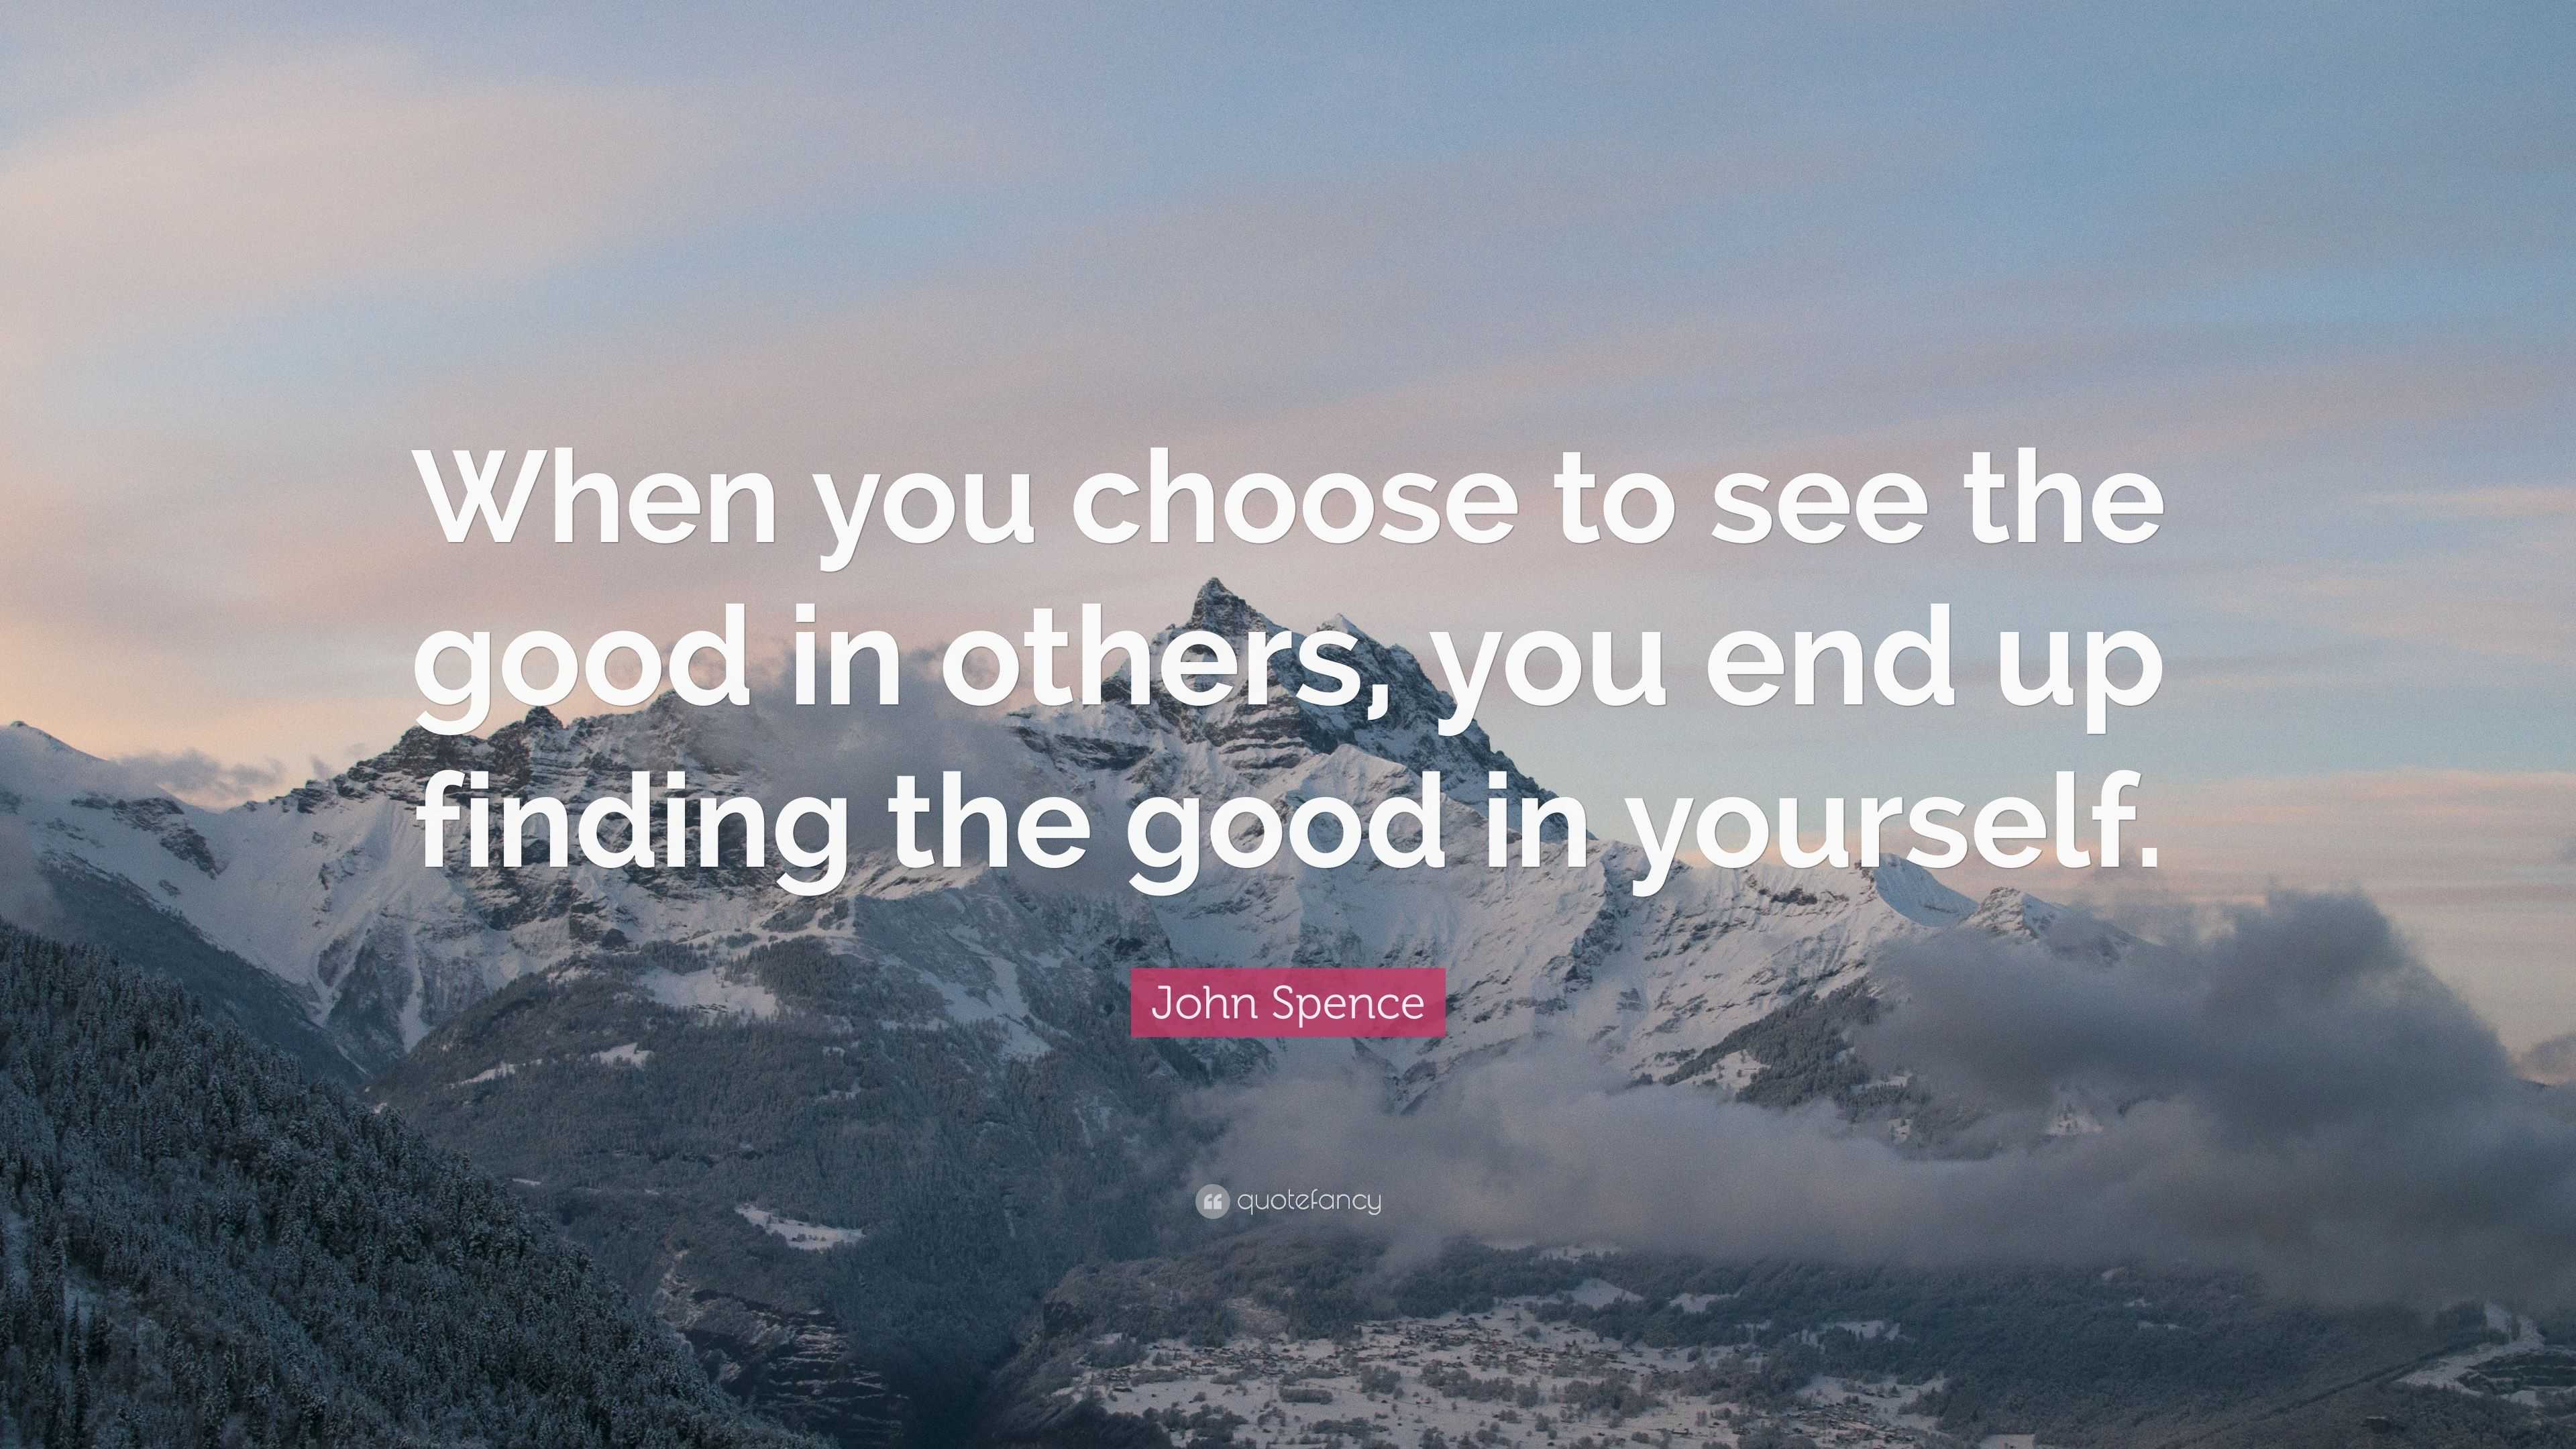 John Spence Quote: “When you choose to see the good in others, you end ...